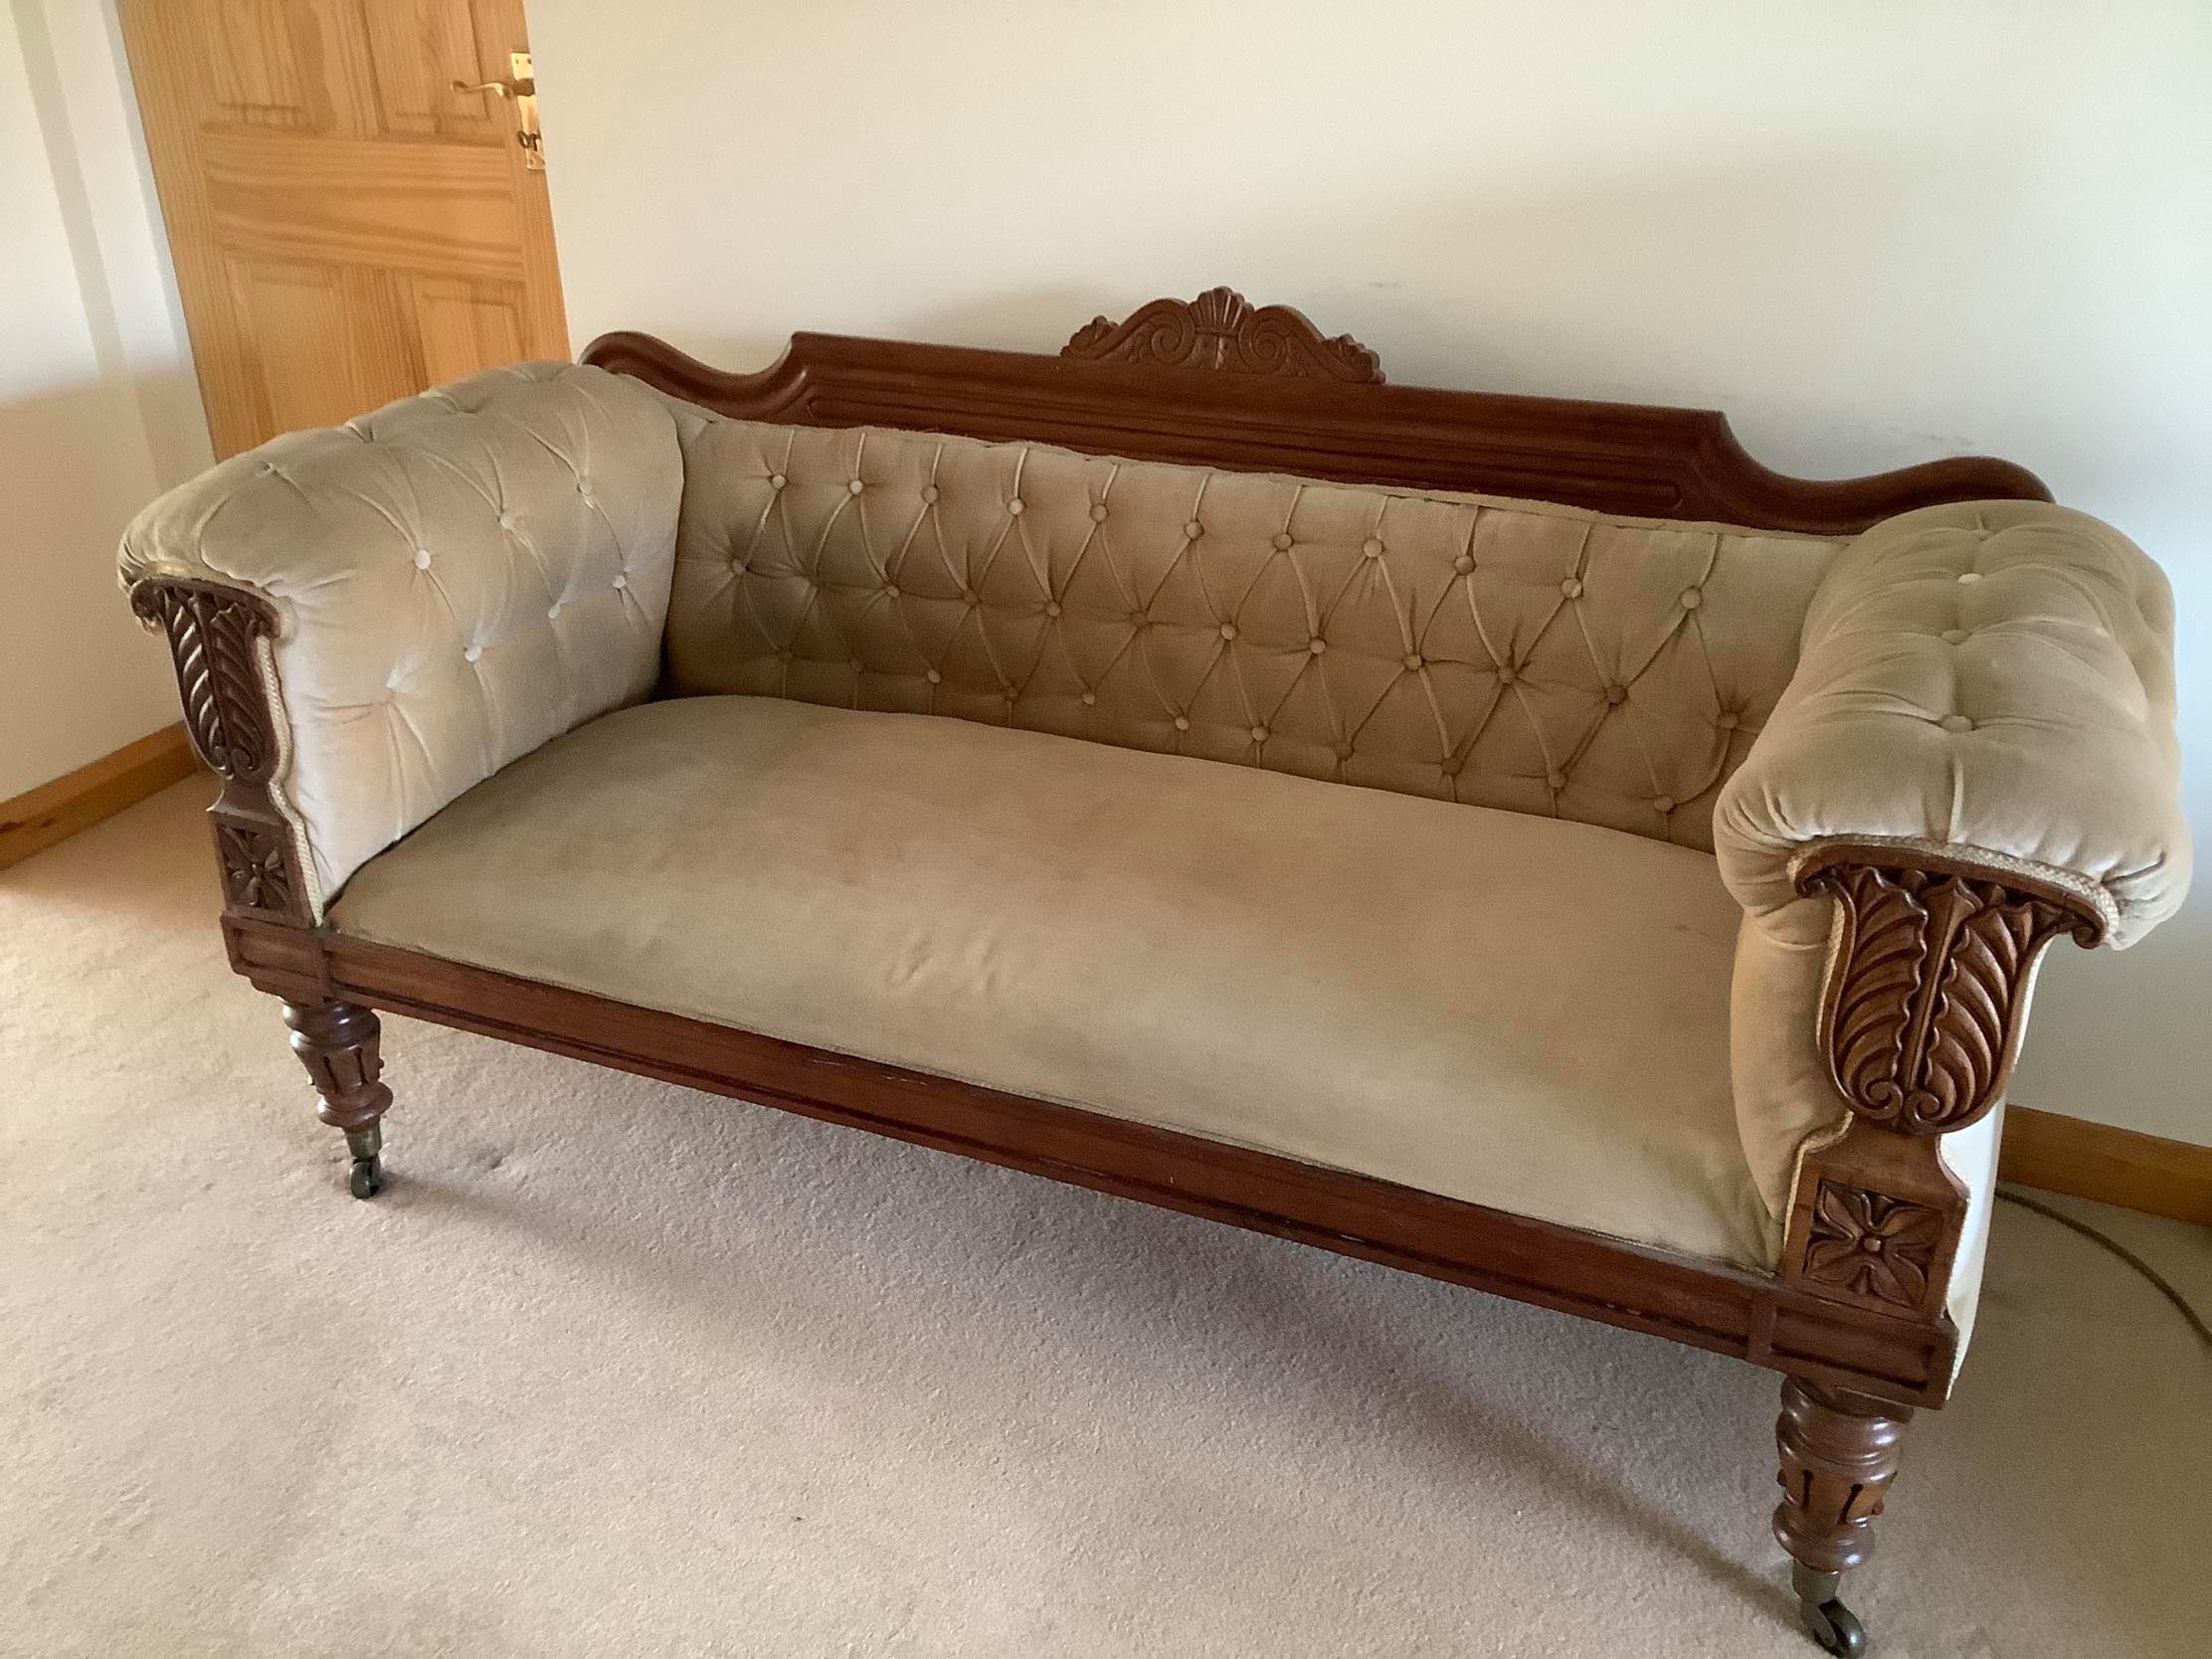 Identifying An Antique Sofa Please